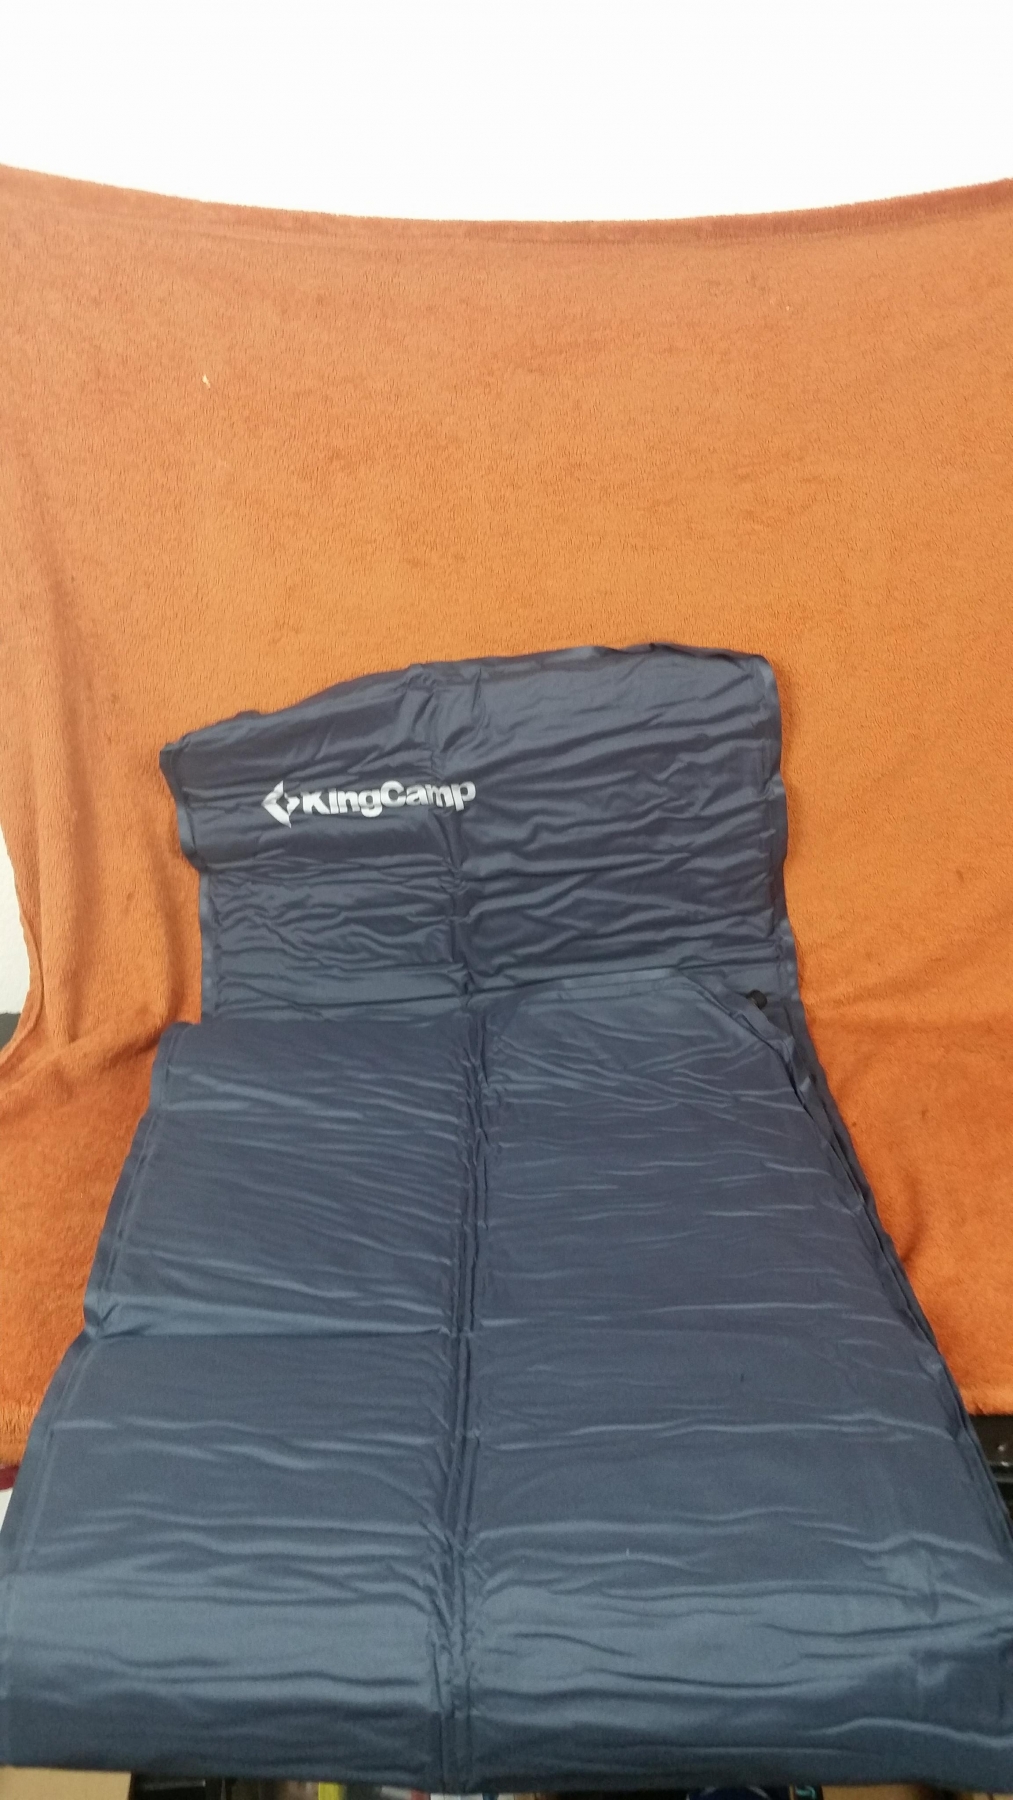 Fantastic air mattress sleeping pad is very supportive, comfortable, & firm.  Comes with carrying case & repair kit, very high quality & impressive!